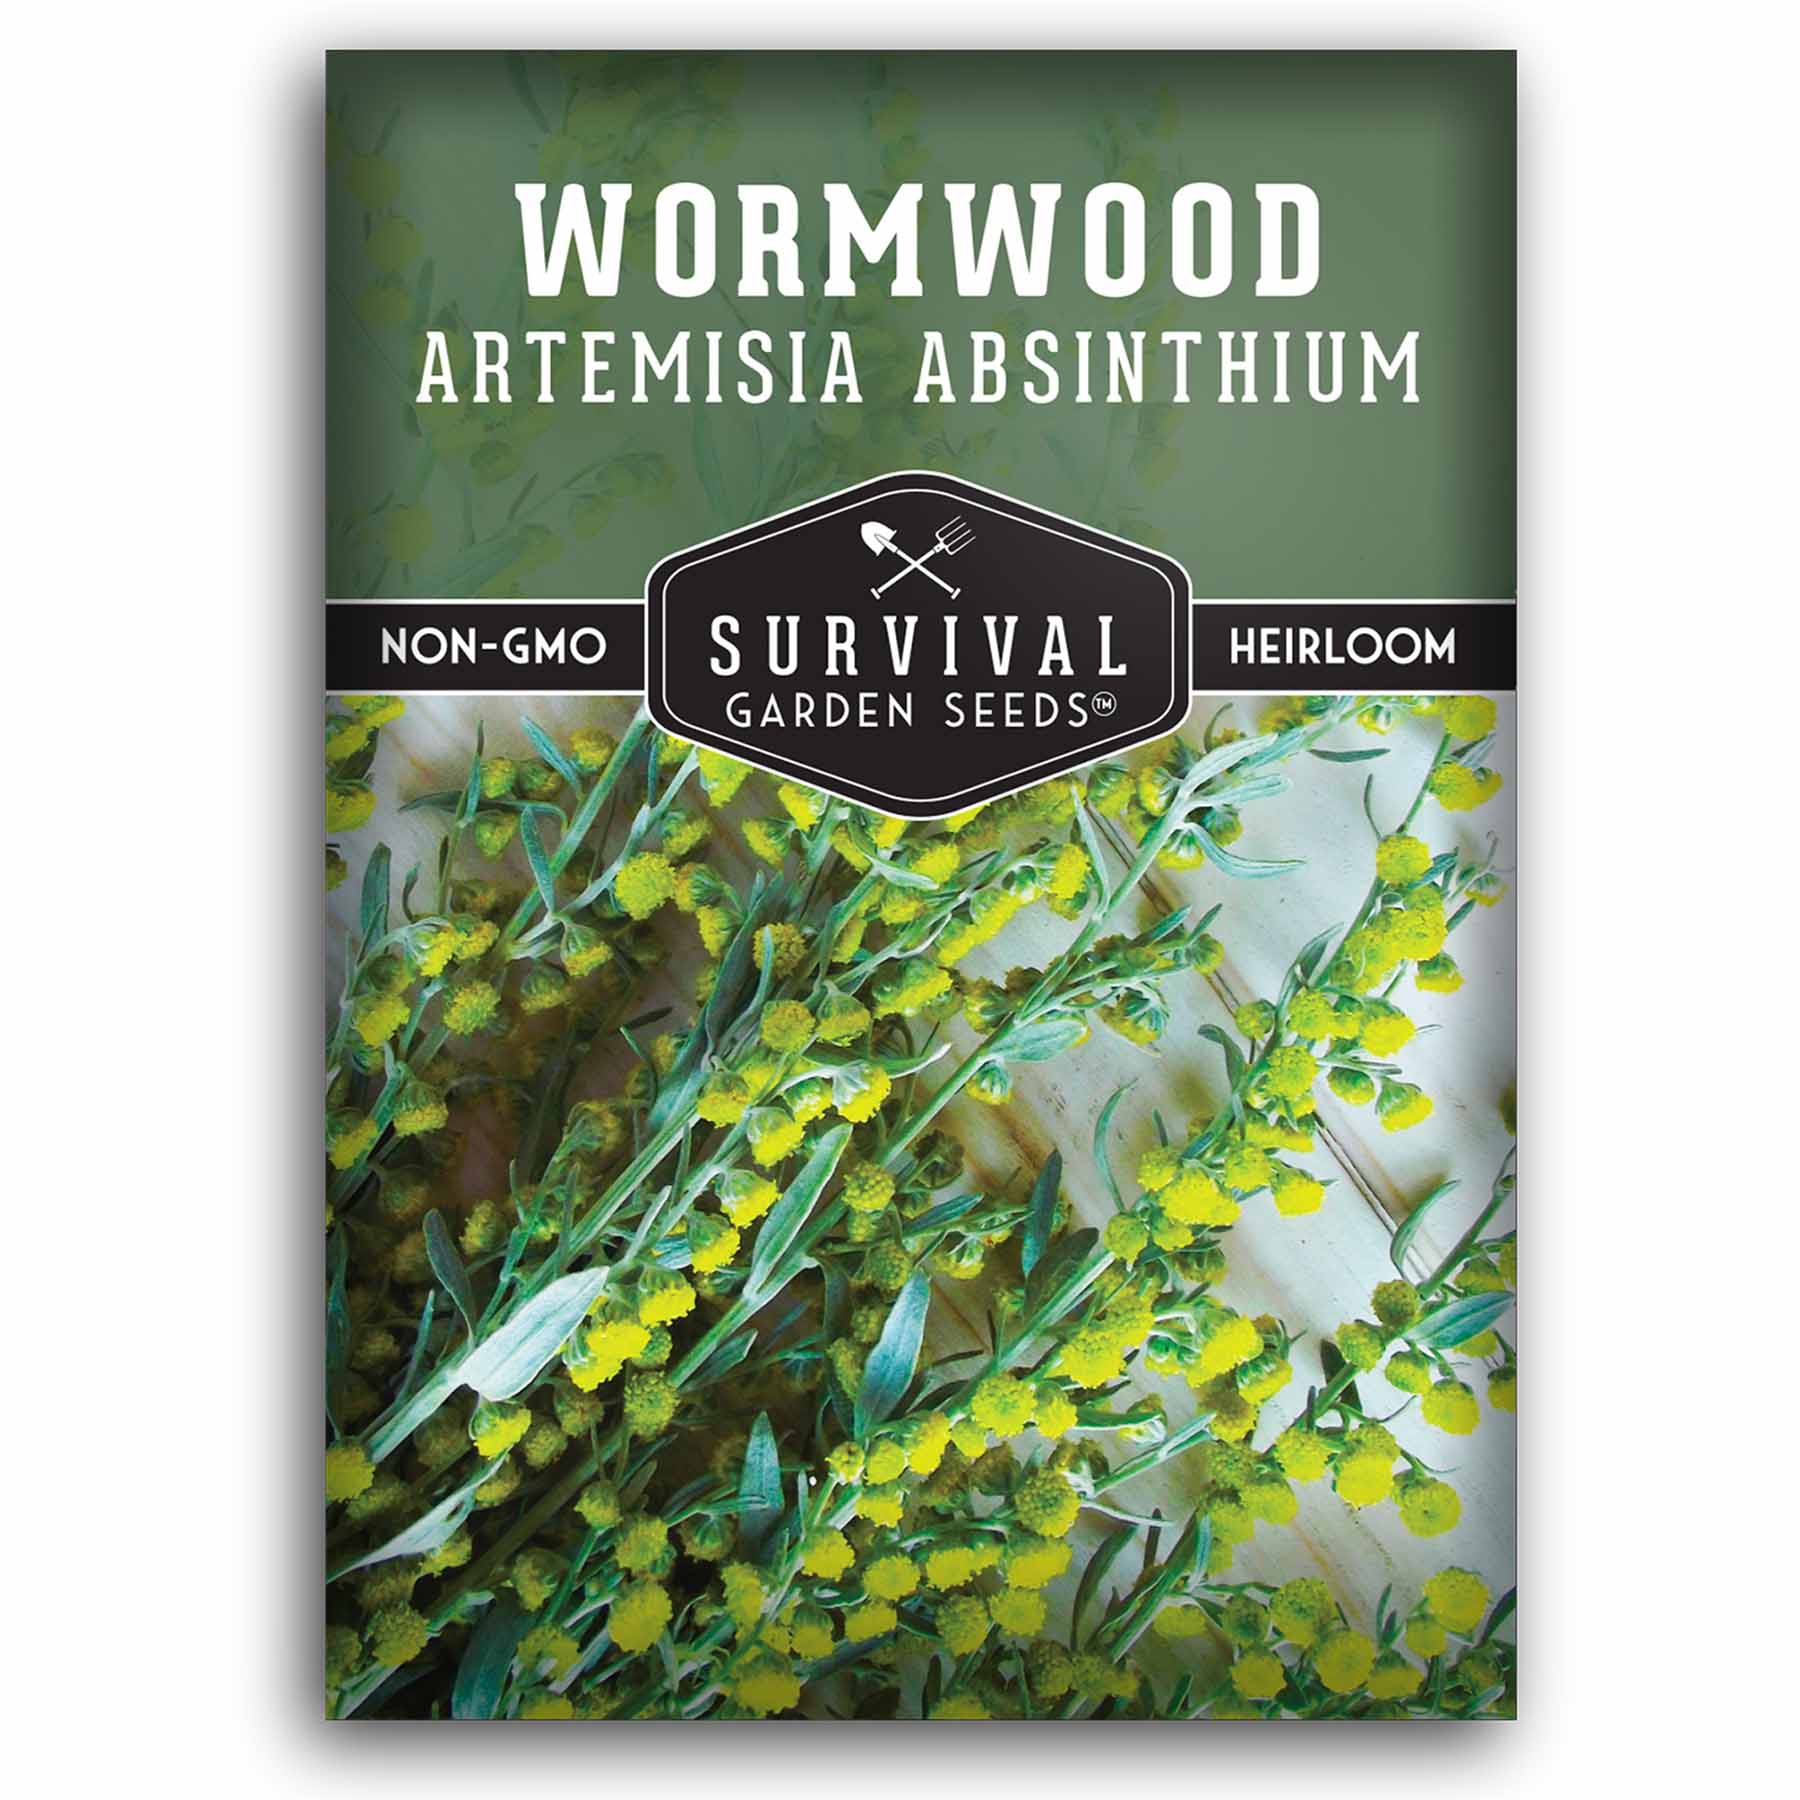 1 packet of Wormwood seeds